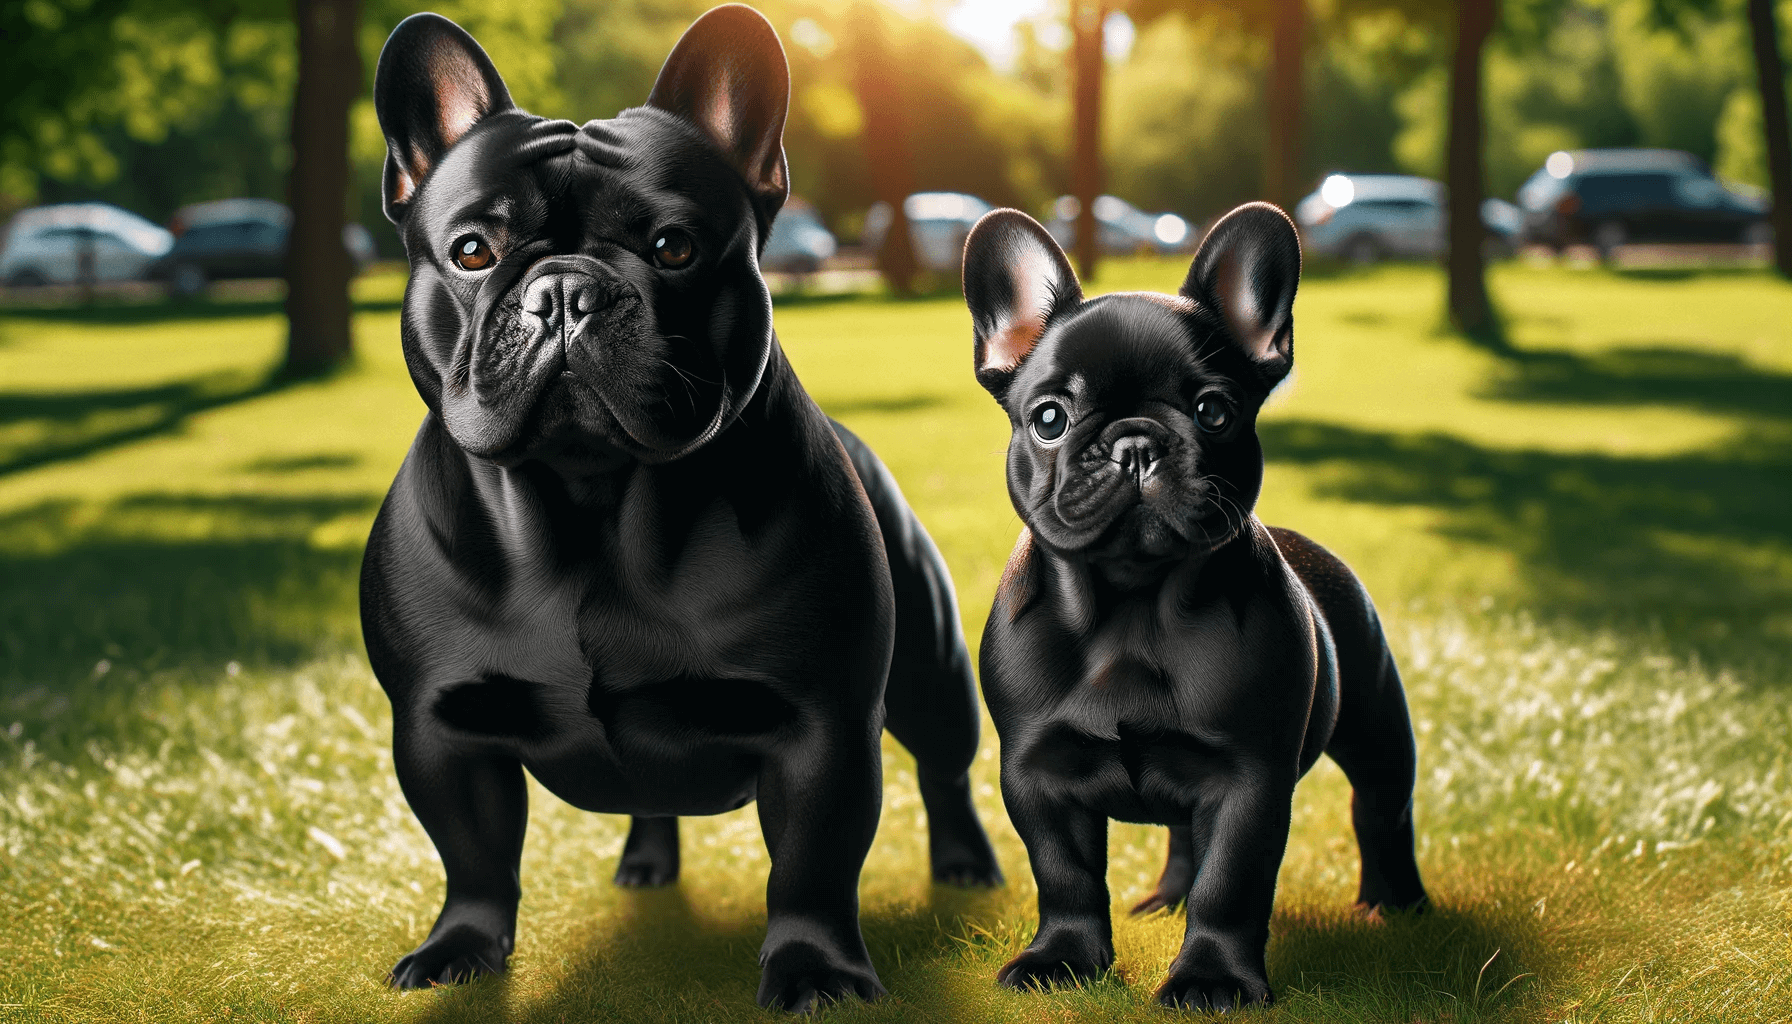 Differences Between Male and Female Black French Bulldogs